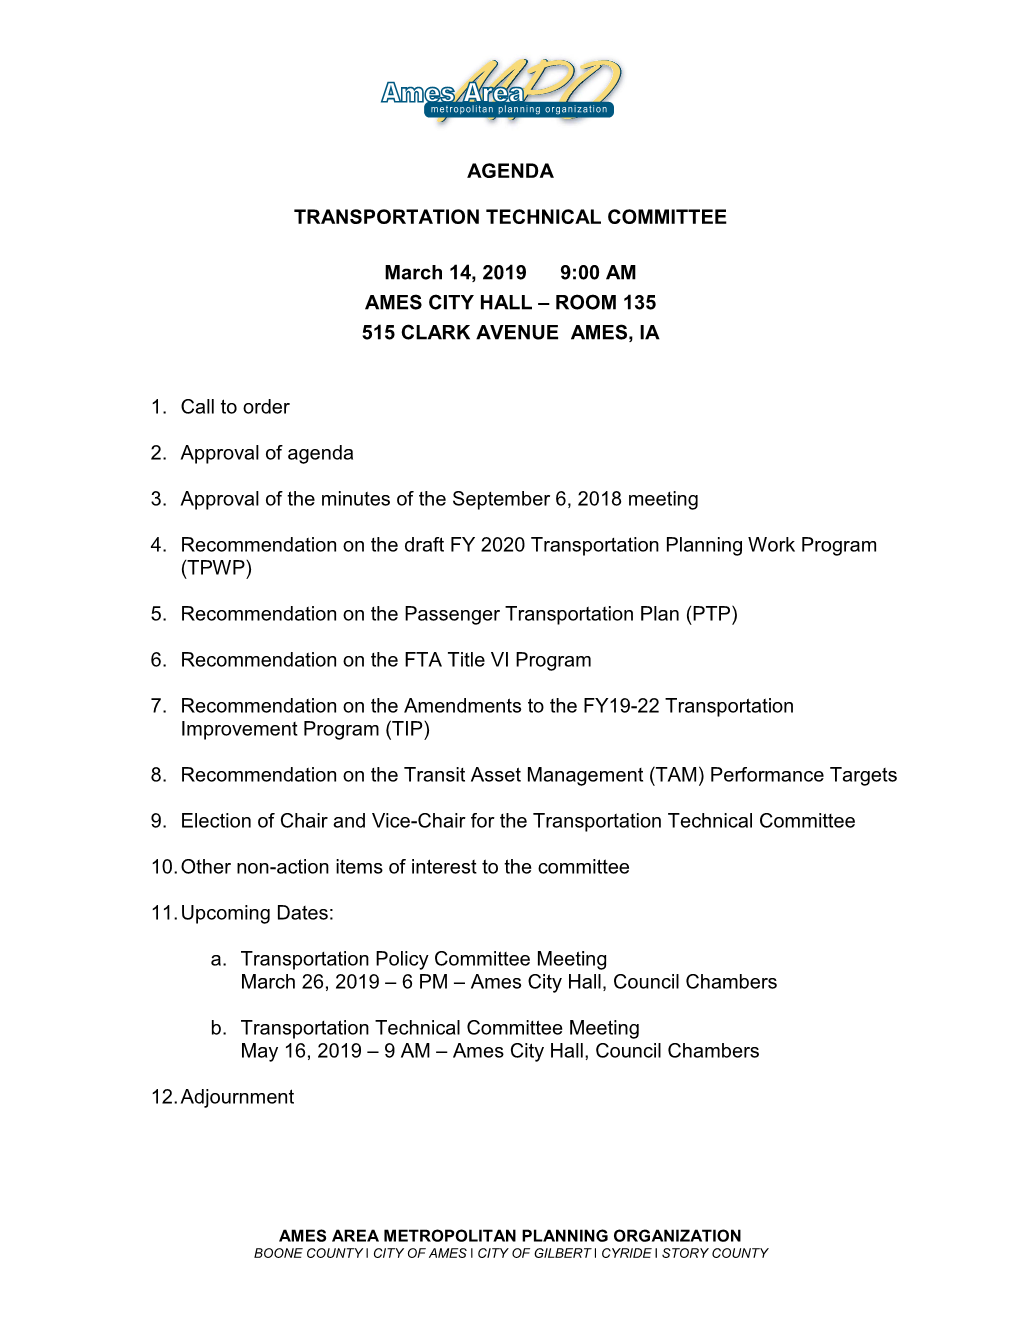 AGENDA TRANSPORTATION TECHNICAL COMMITTEE March 14, 2019 9:00 AM AMES CITY HALL – ROOM 135 515 CLARK AVENUE AMES, IA 1. C